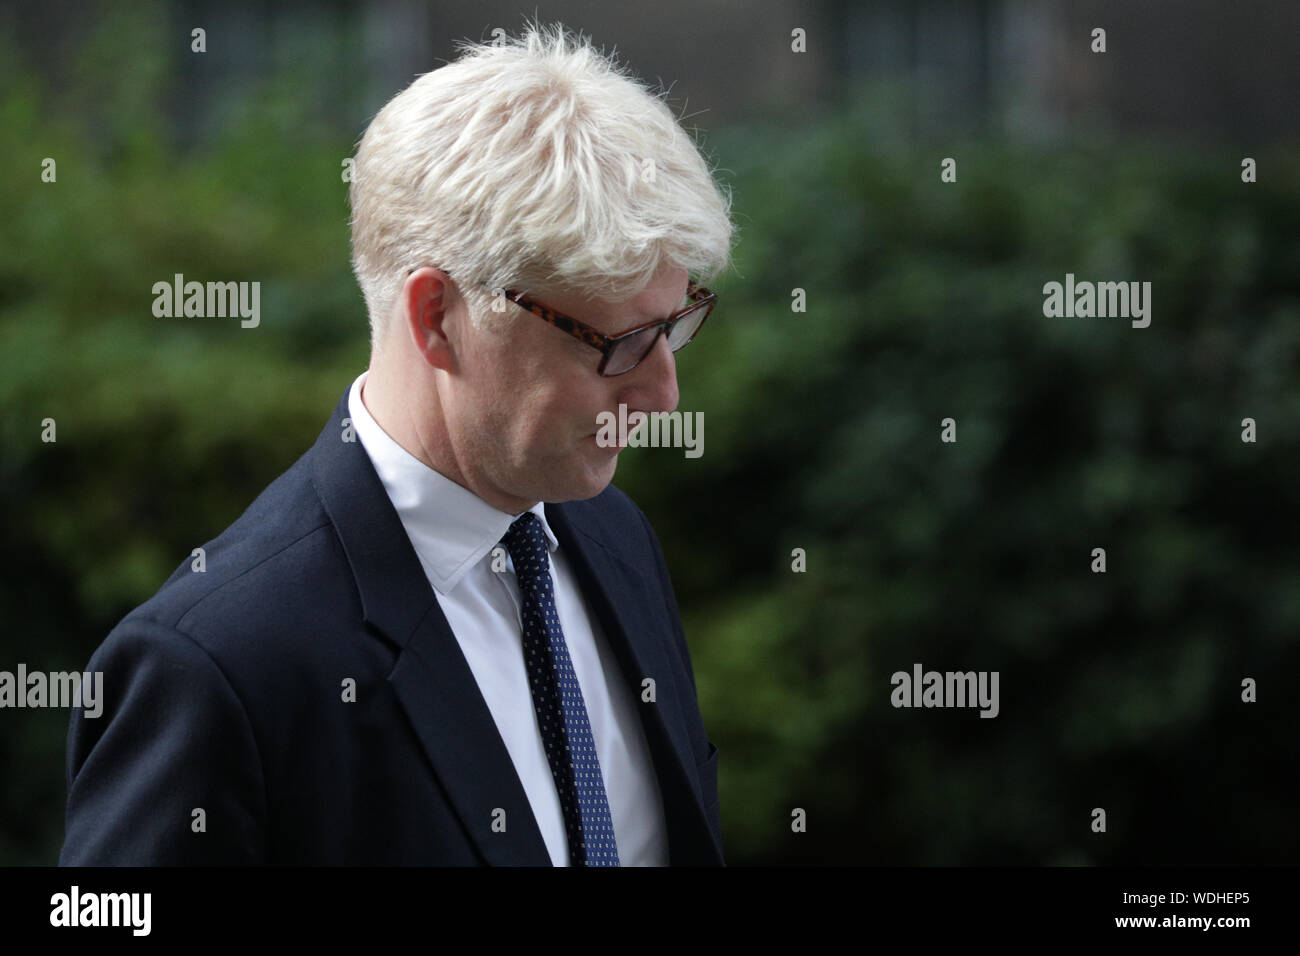 Westminster, London, UK. 29th Aug, 2019. Jo Johnson, Minister for Universities and Science and PM Boris Johnson's brother, enters No 10 Downing Street this evening. Credit: Imageplotter/Alamy Live News Stock Photo